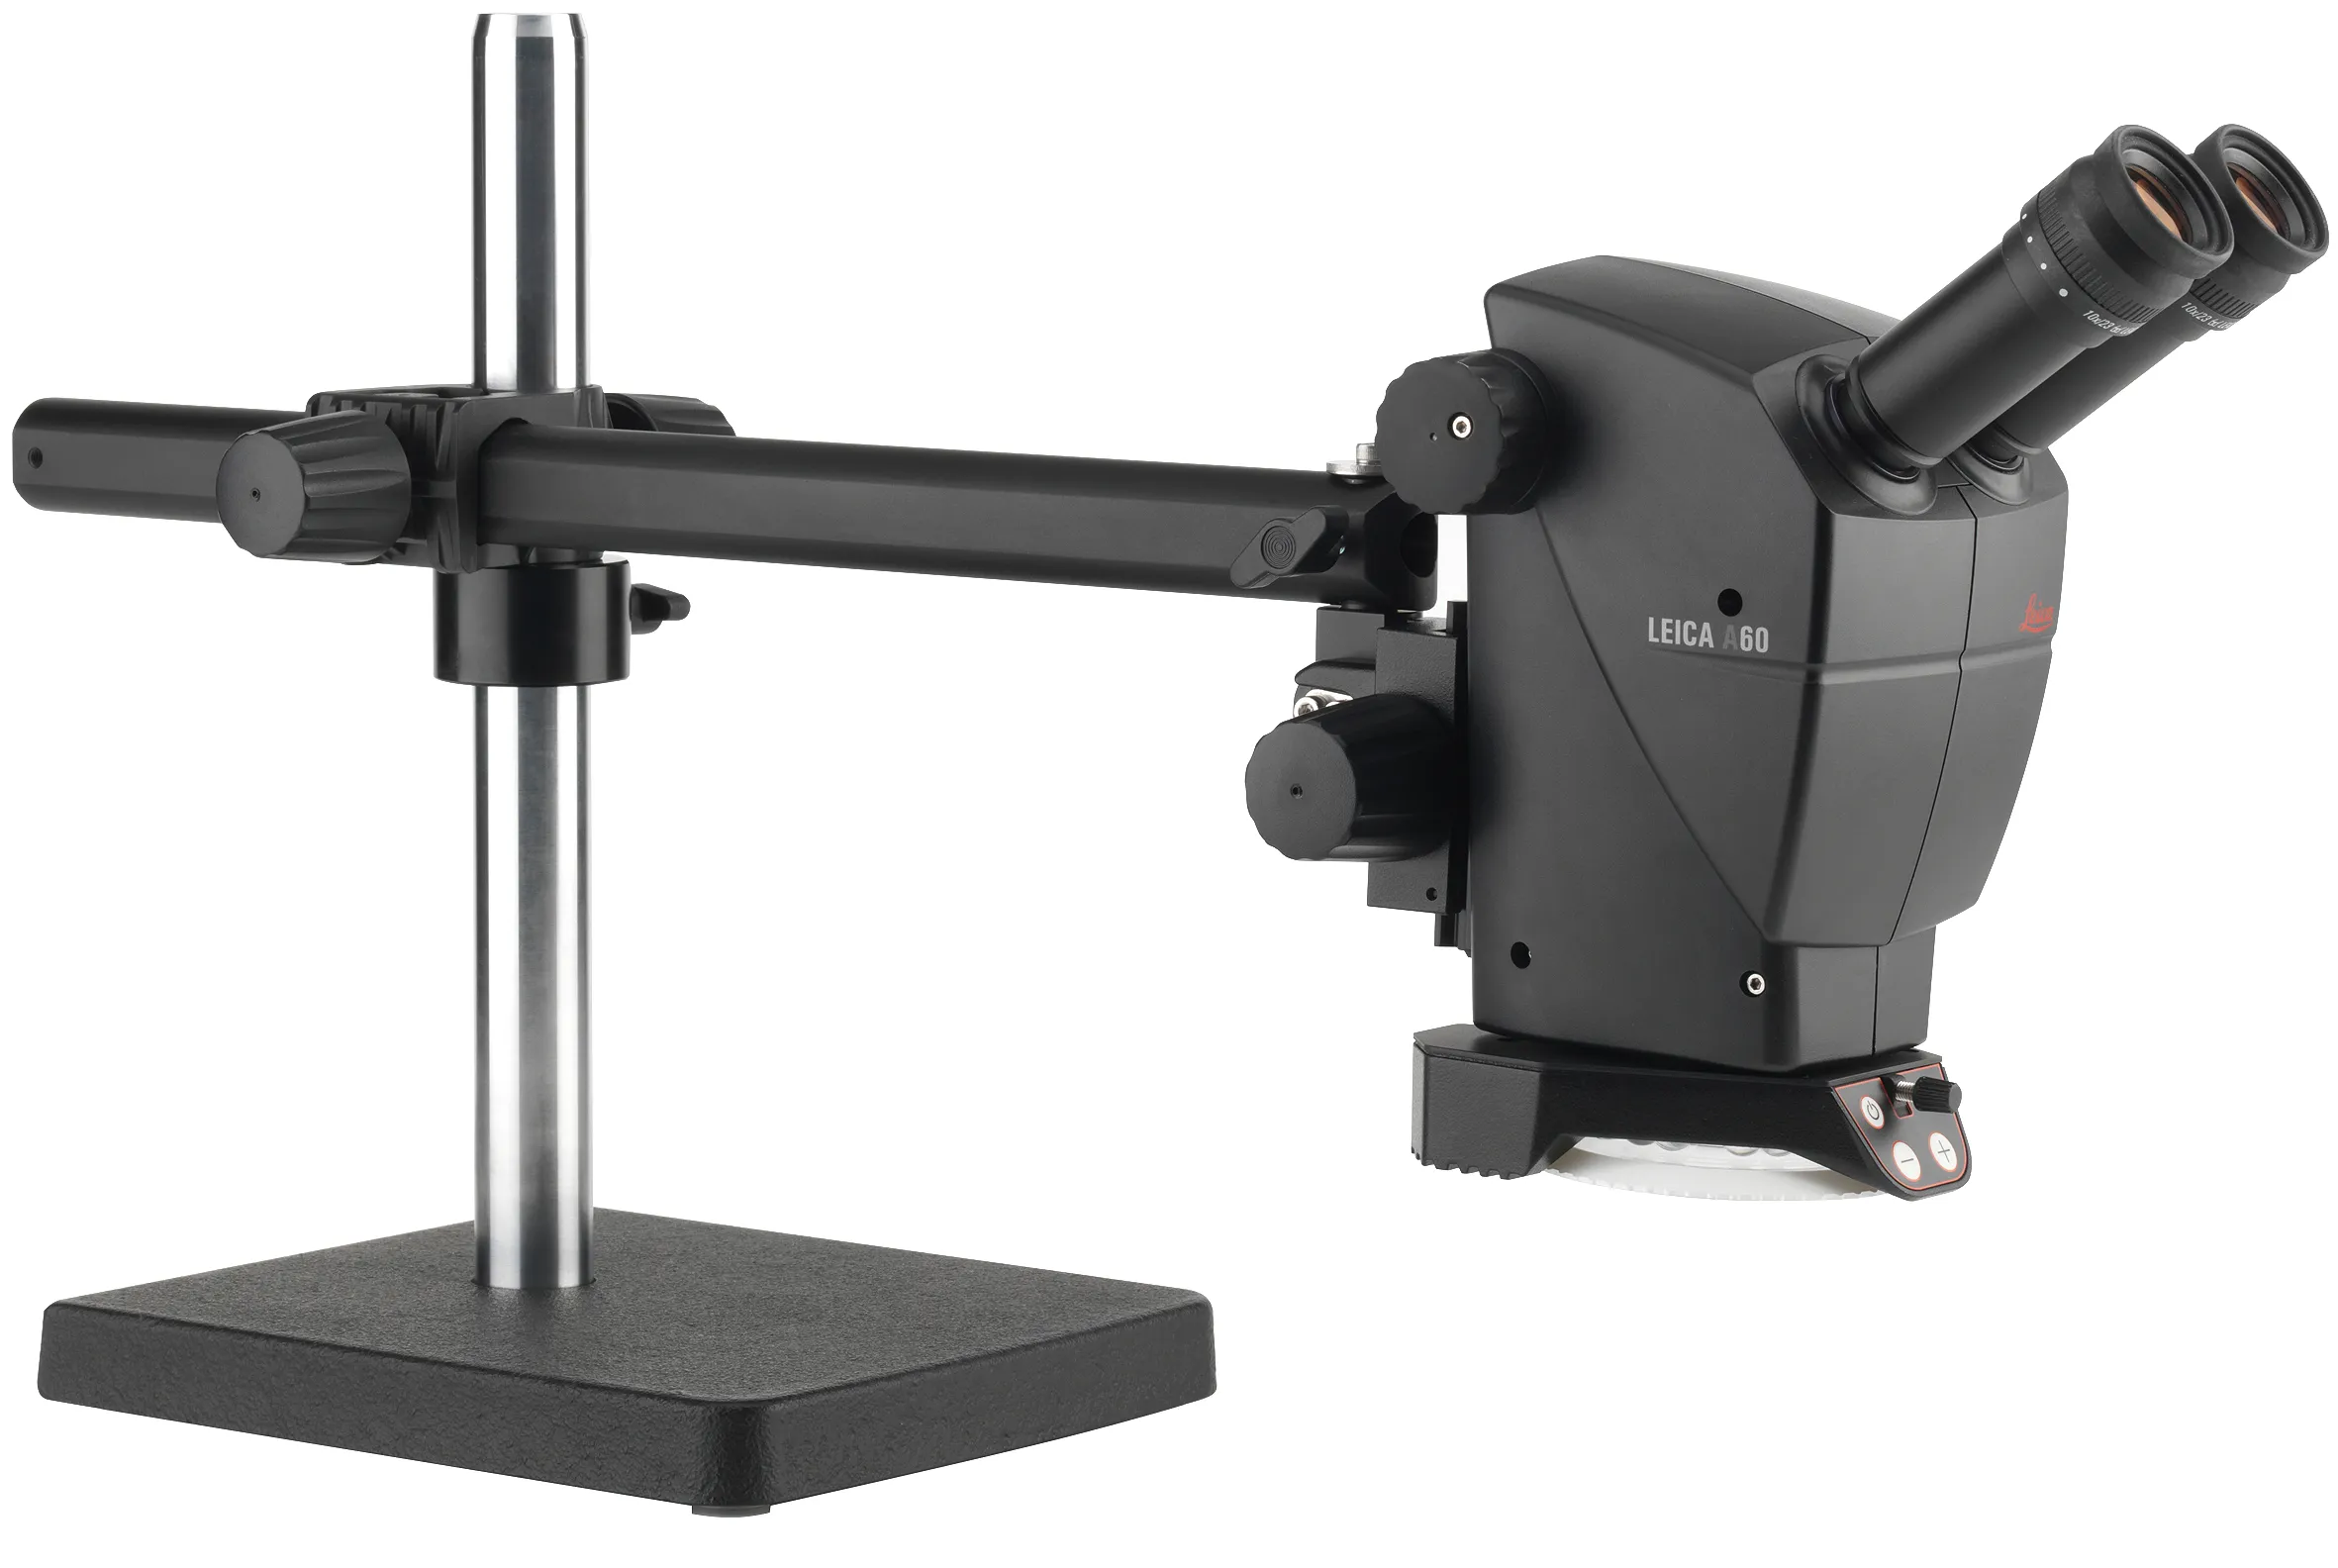 Leica A60 S Inspection and Rework Microscope with Boom Stand